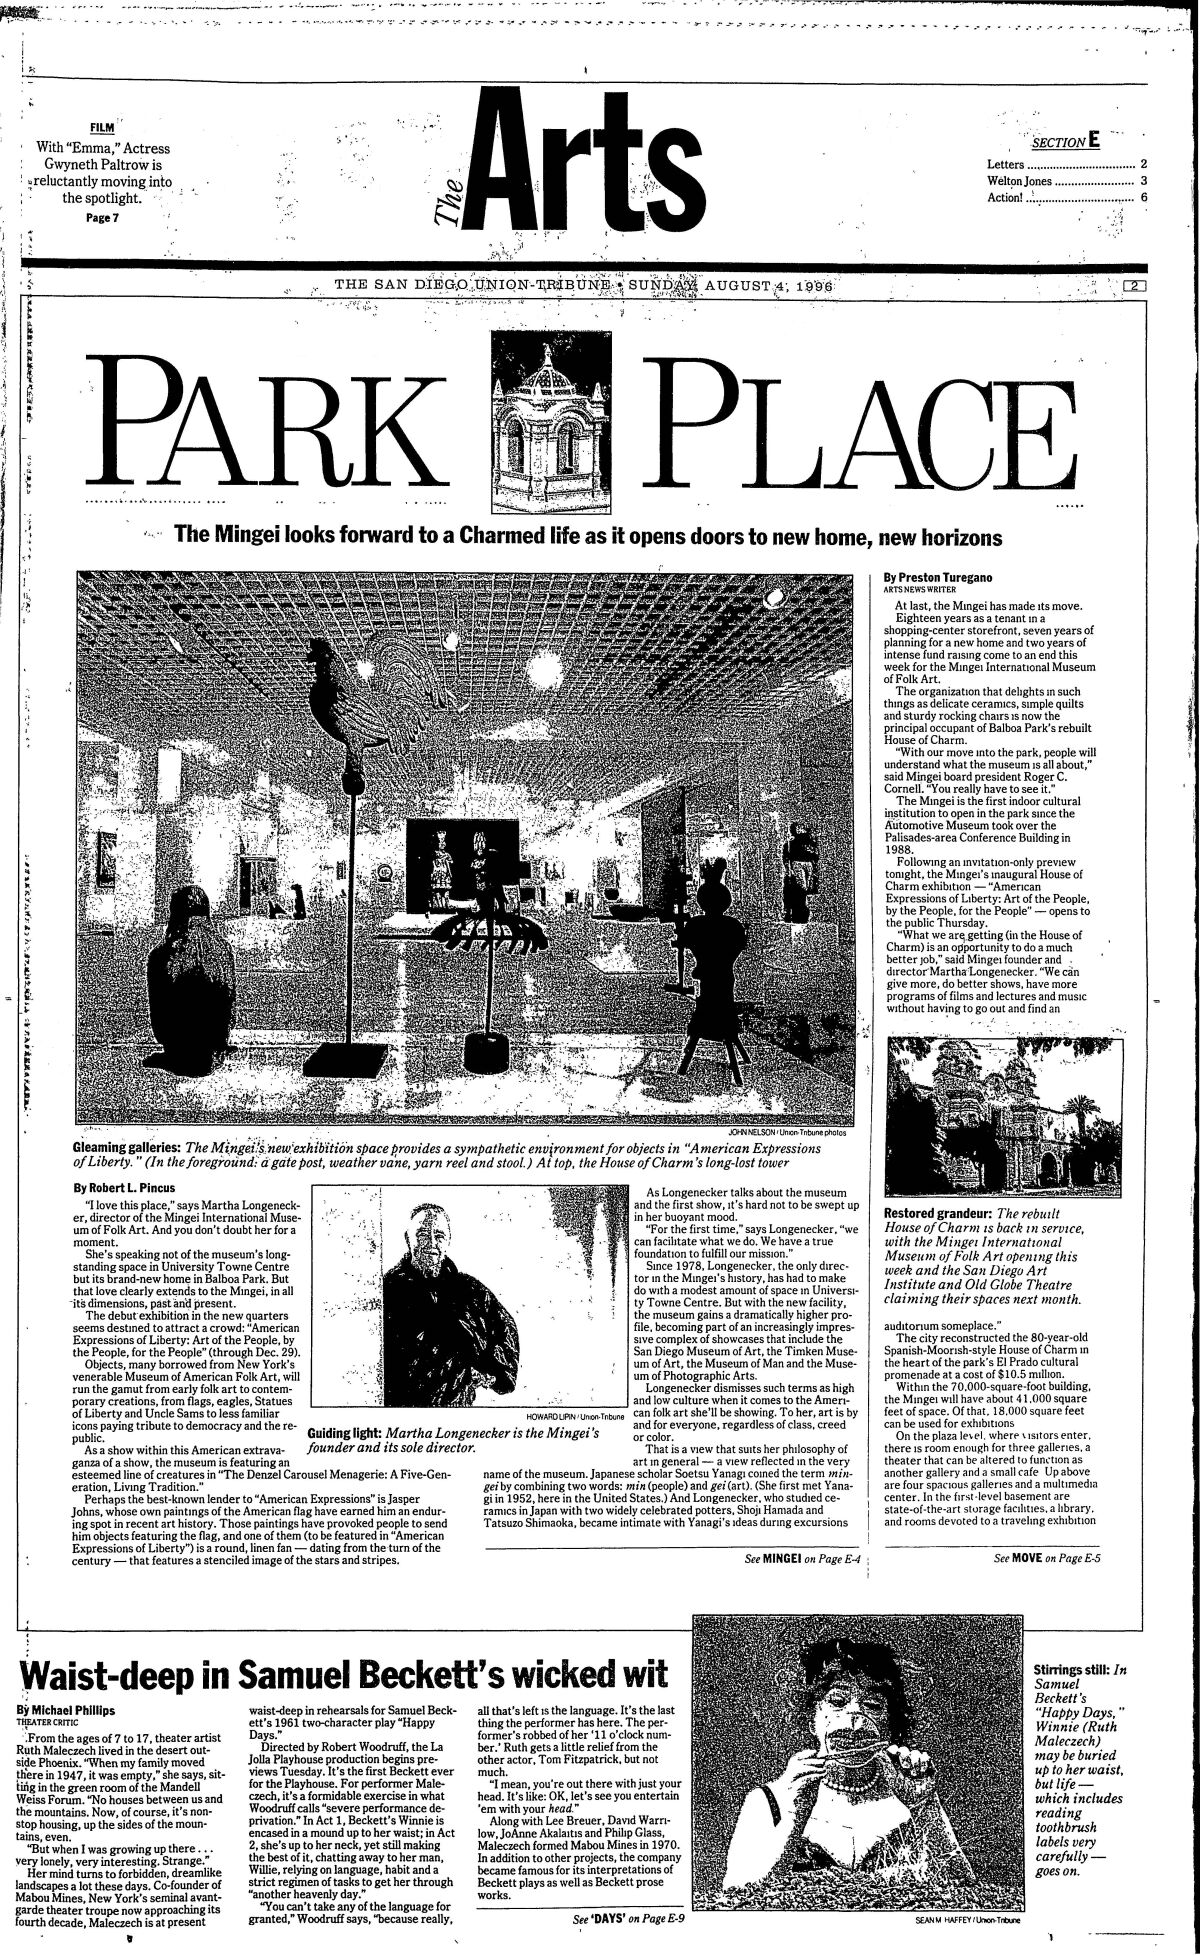 The front page of the Arts section from The San Diego Union-Tribune on Aug. 4, 1996